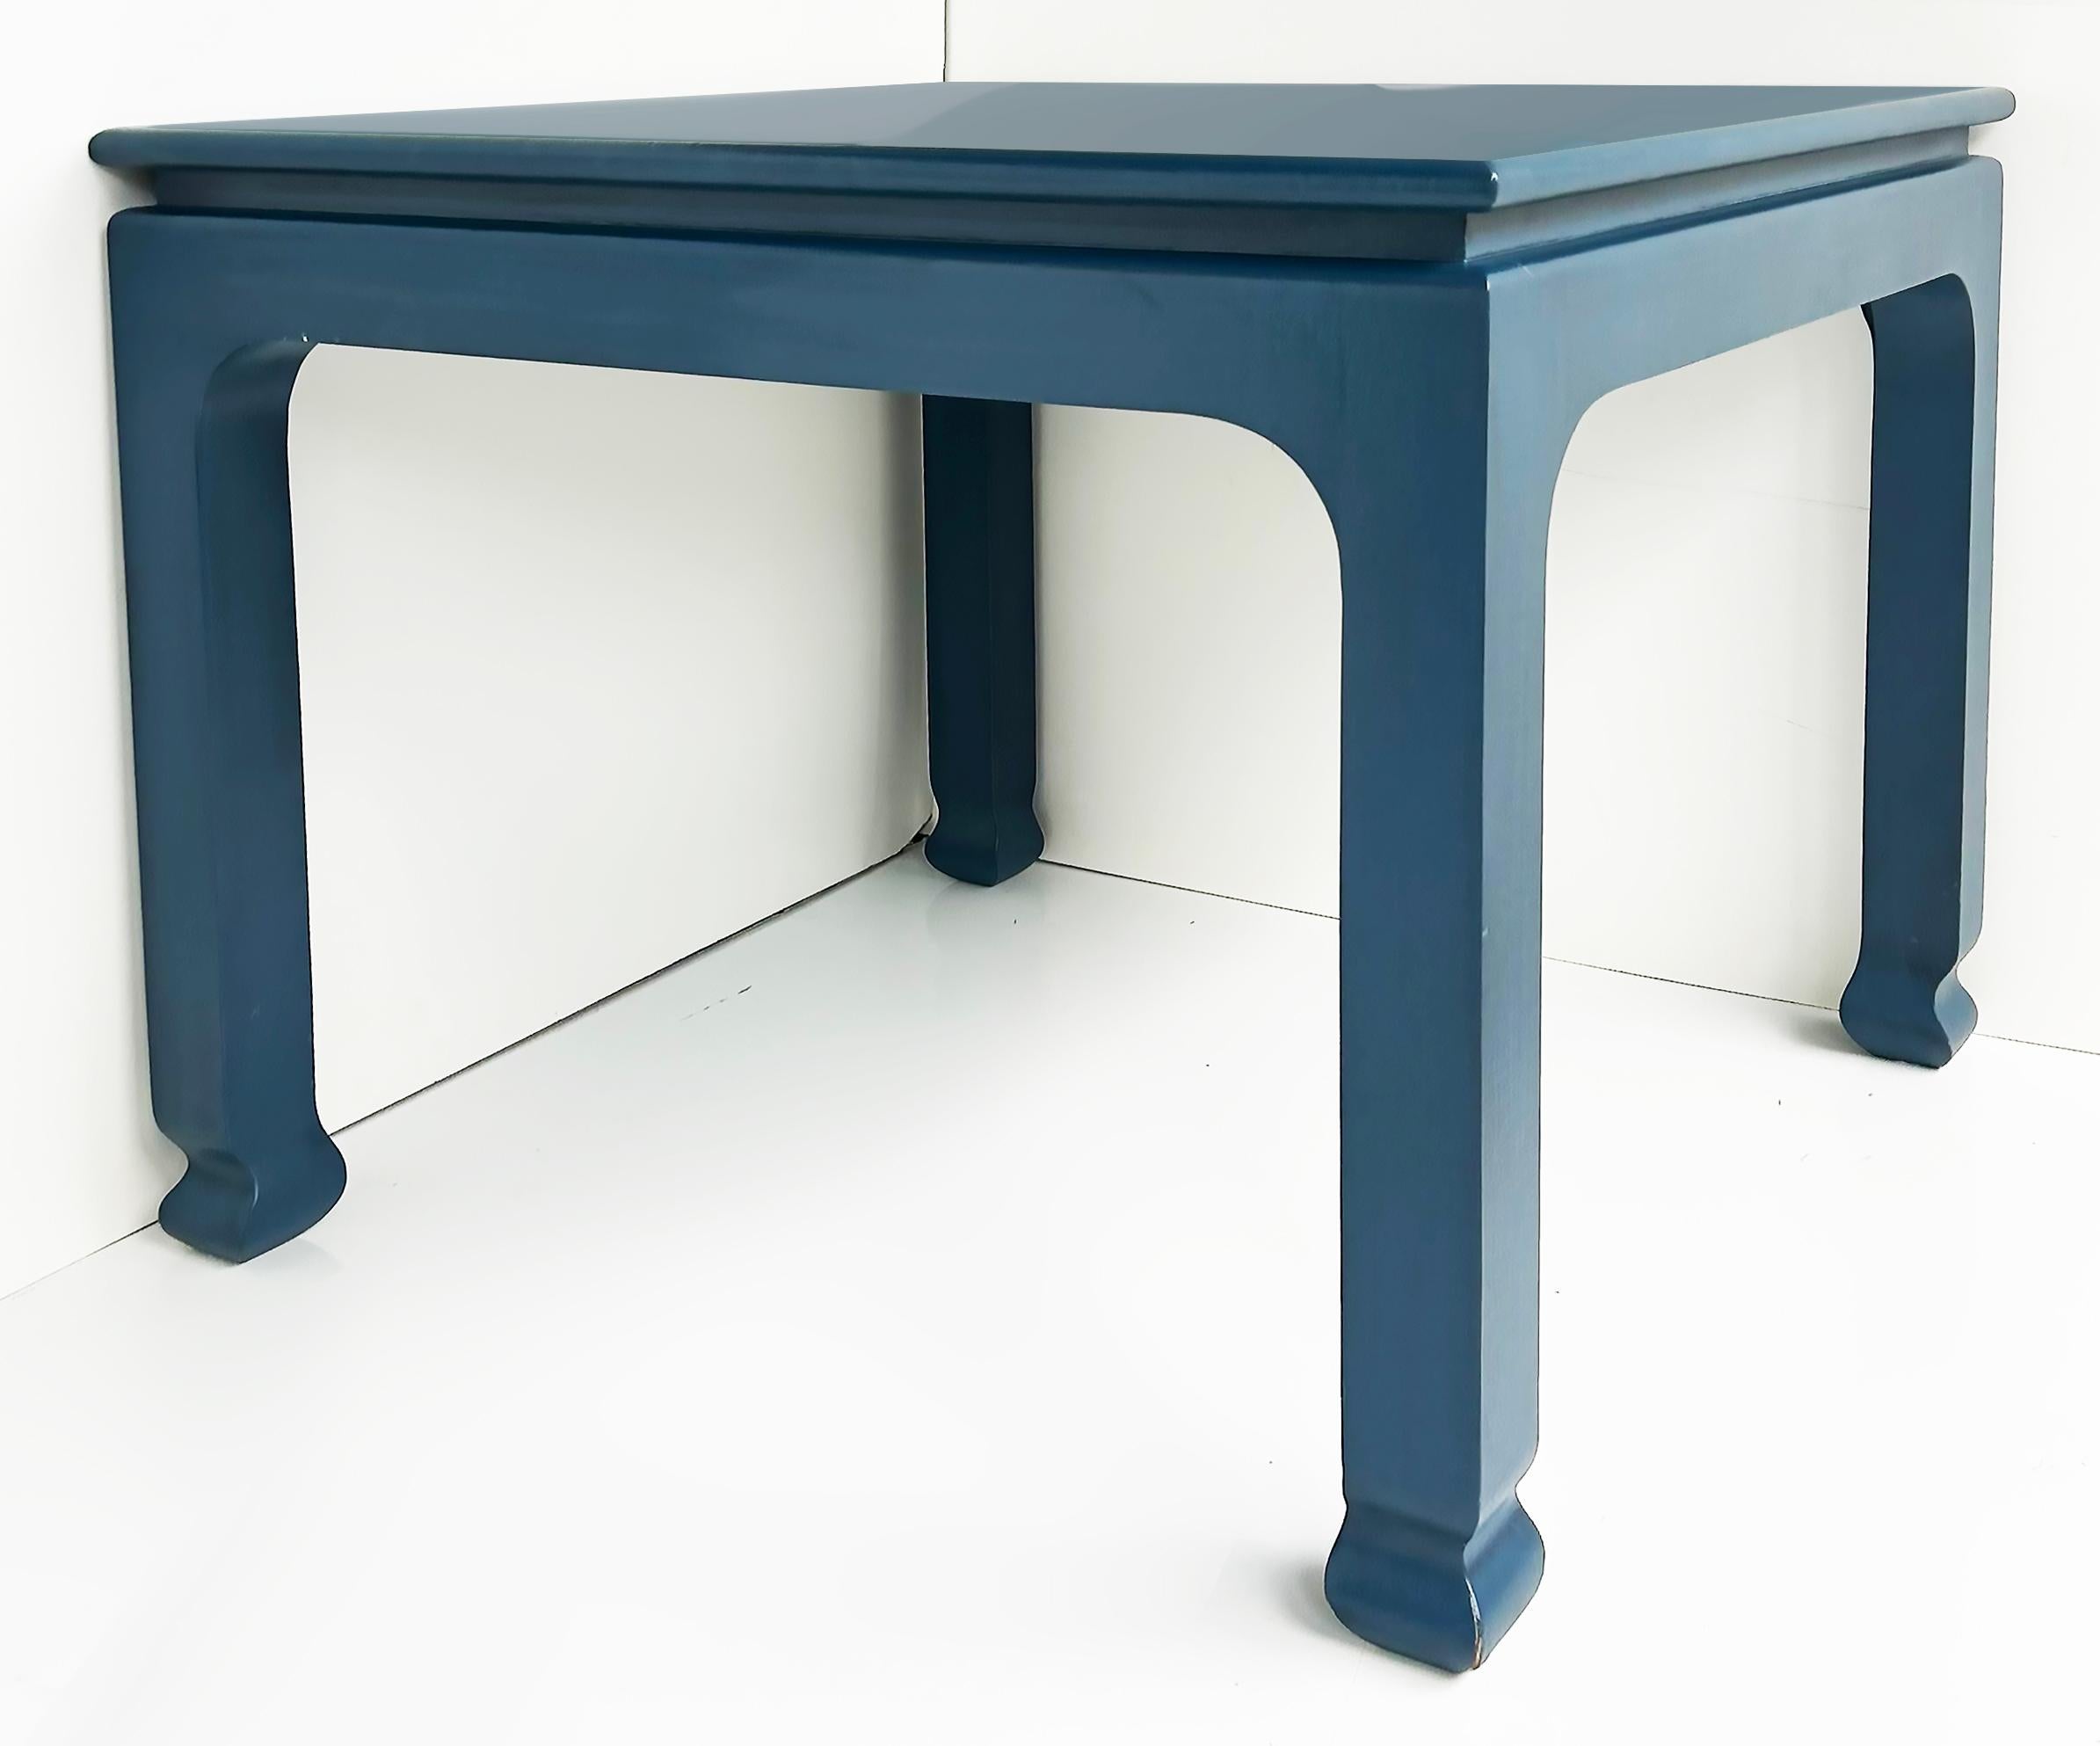 Harrison Van Horn Lacquered Grass Cloth Covered Card Table, Los Angeles 

Offered for sale is a Harrison Van Horn Los Angeles blue lacquered square game/card or small dining table.  This table has an Asian modern feel and dates to the late 1970s or